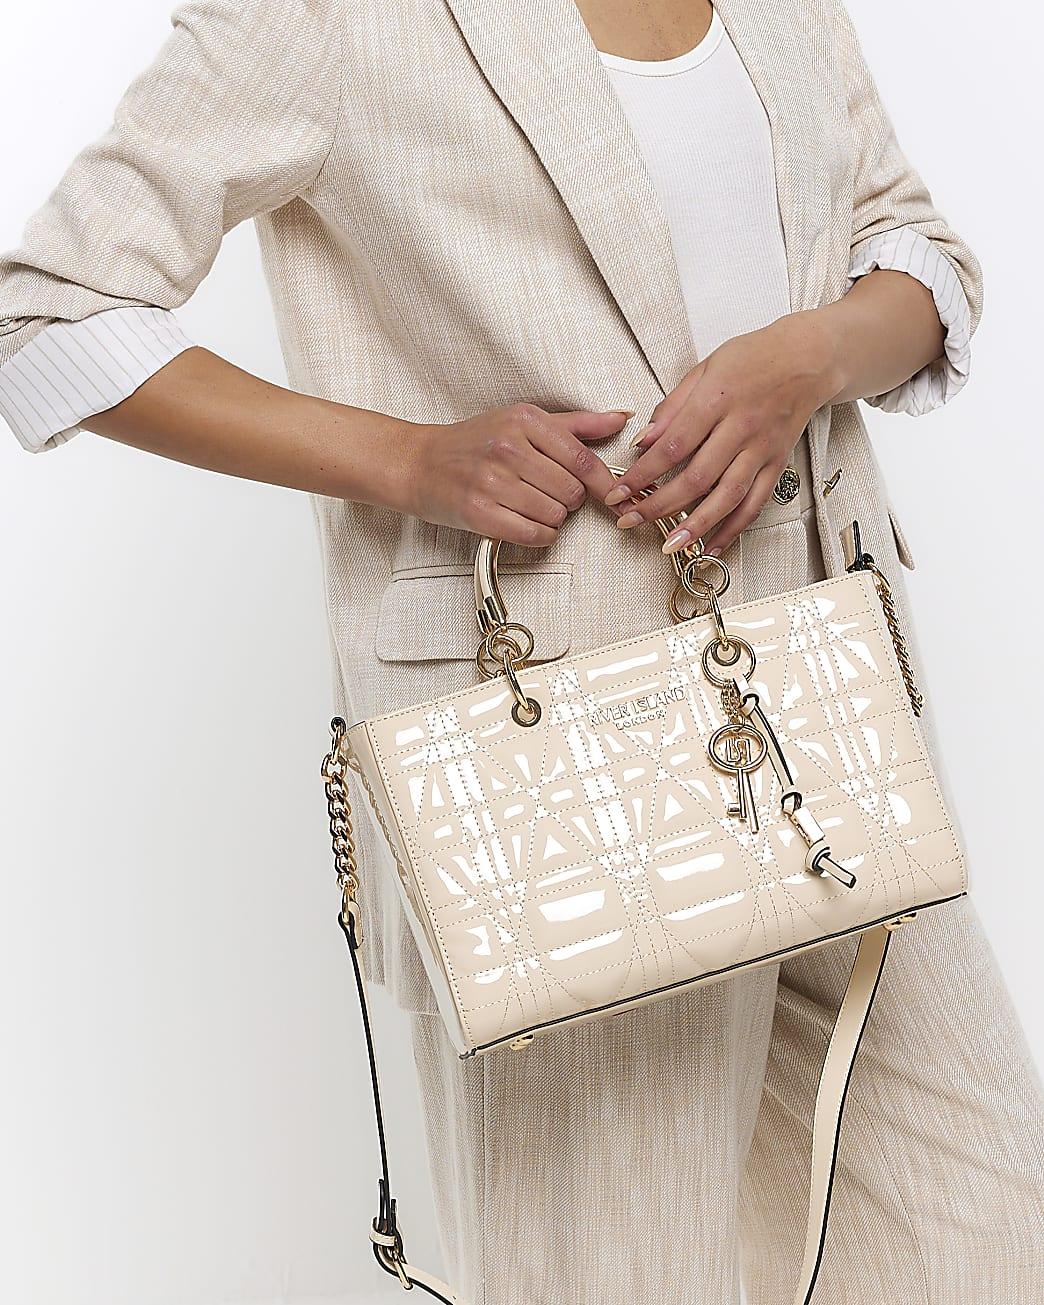 River Island Patent Tote Bag in White | Lyst